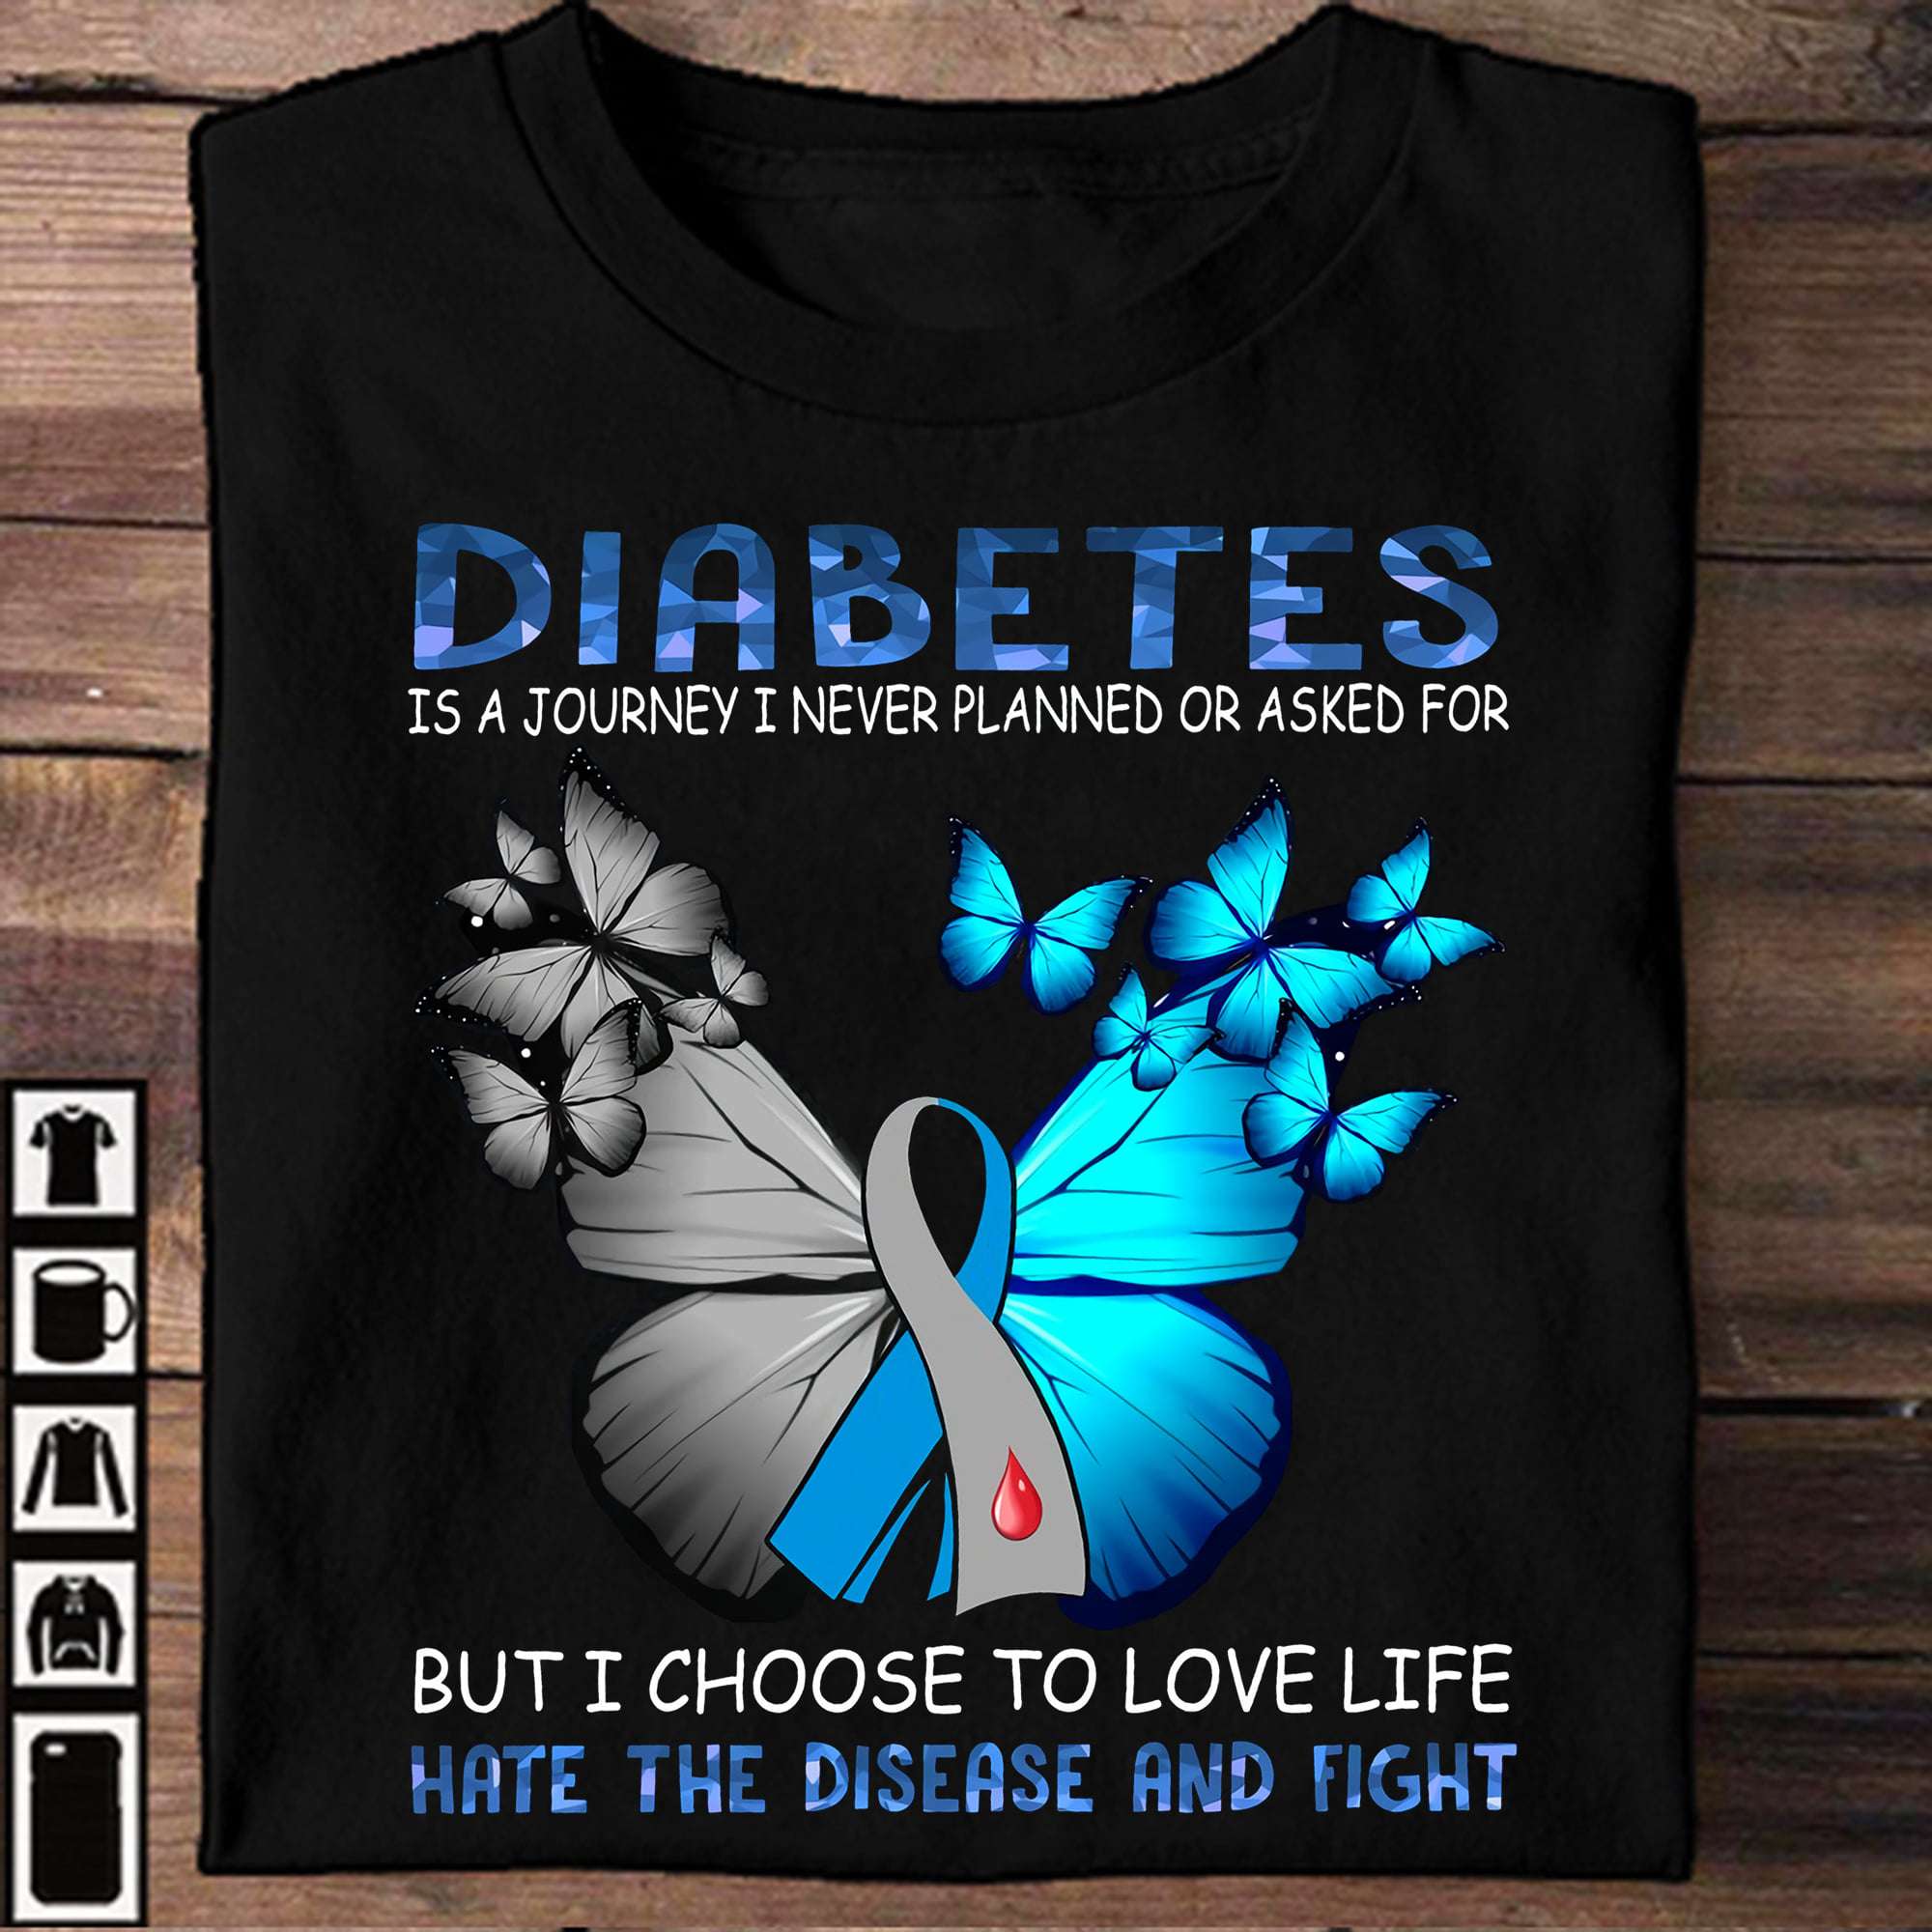 Diabetes is a journey I never planned or asked for but I choose to love life, hate the disease and fight - Butterflies diabetes ribbon